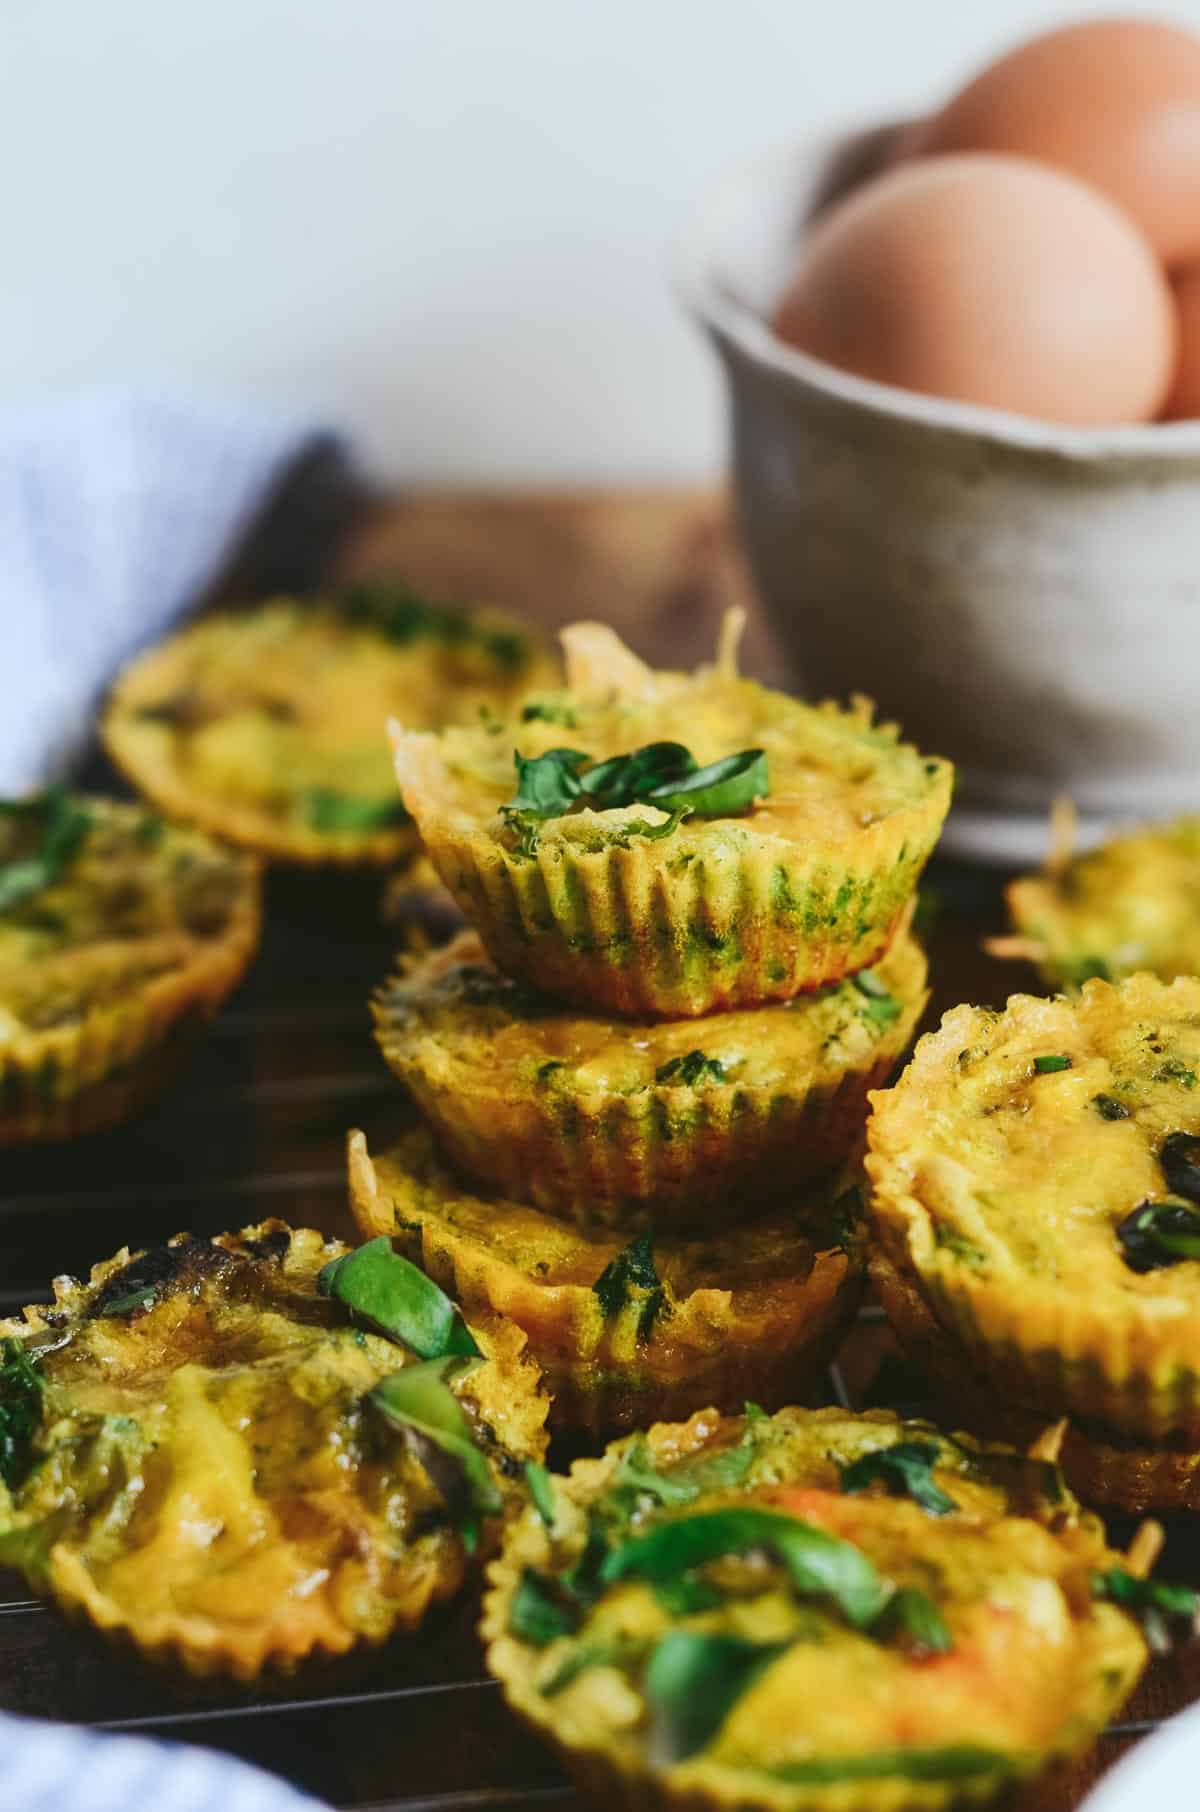 Egg bites stack on top of each other, with green spinach and kale.